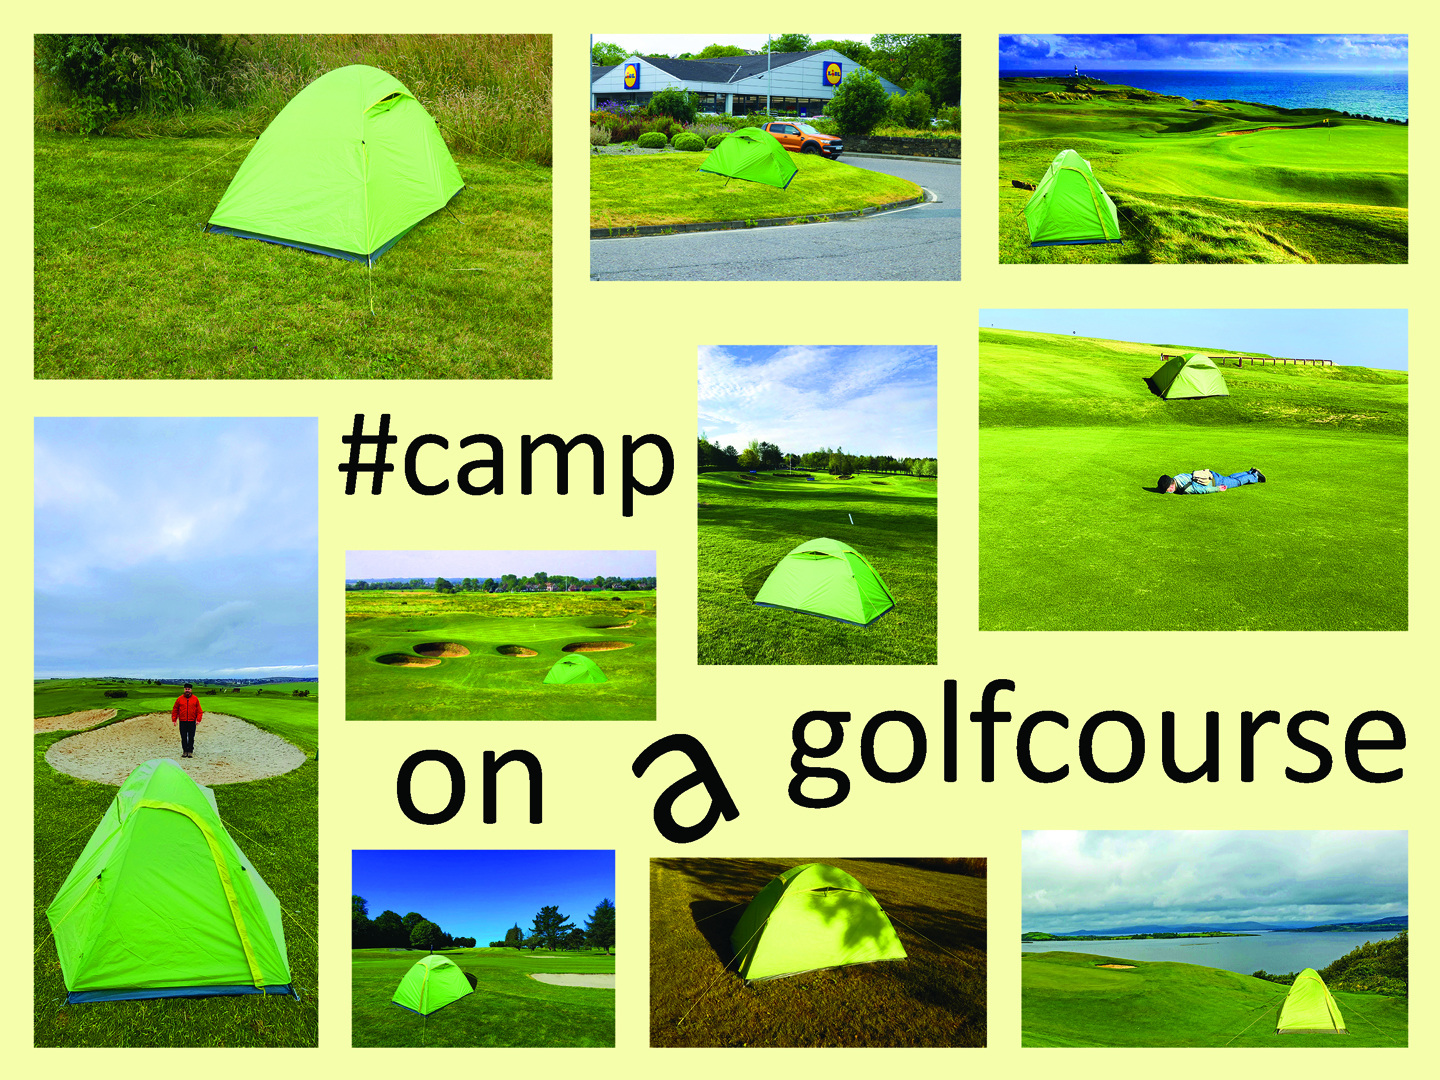 Image for work #camponagolfcourse Poster